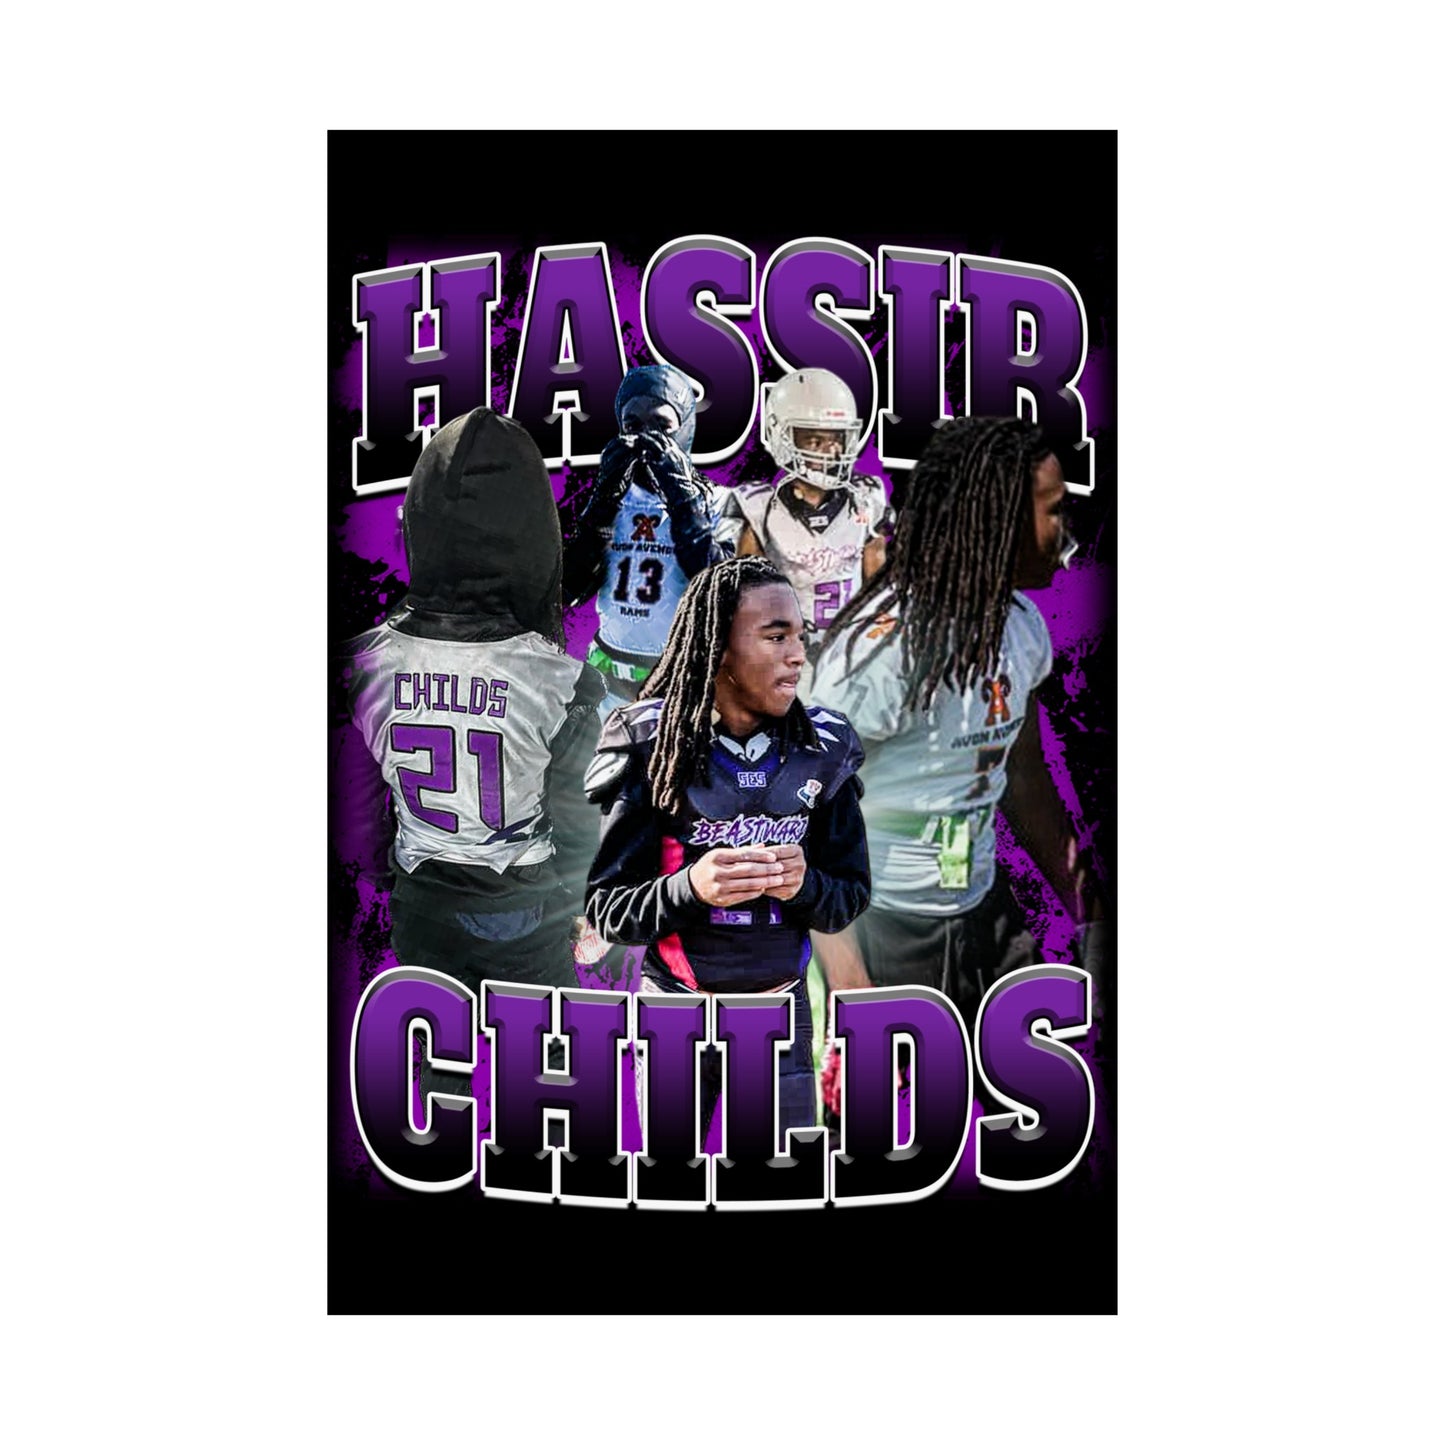 Hassir Childs Poster 24" x 36"